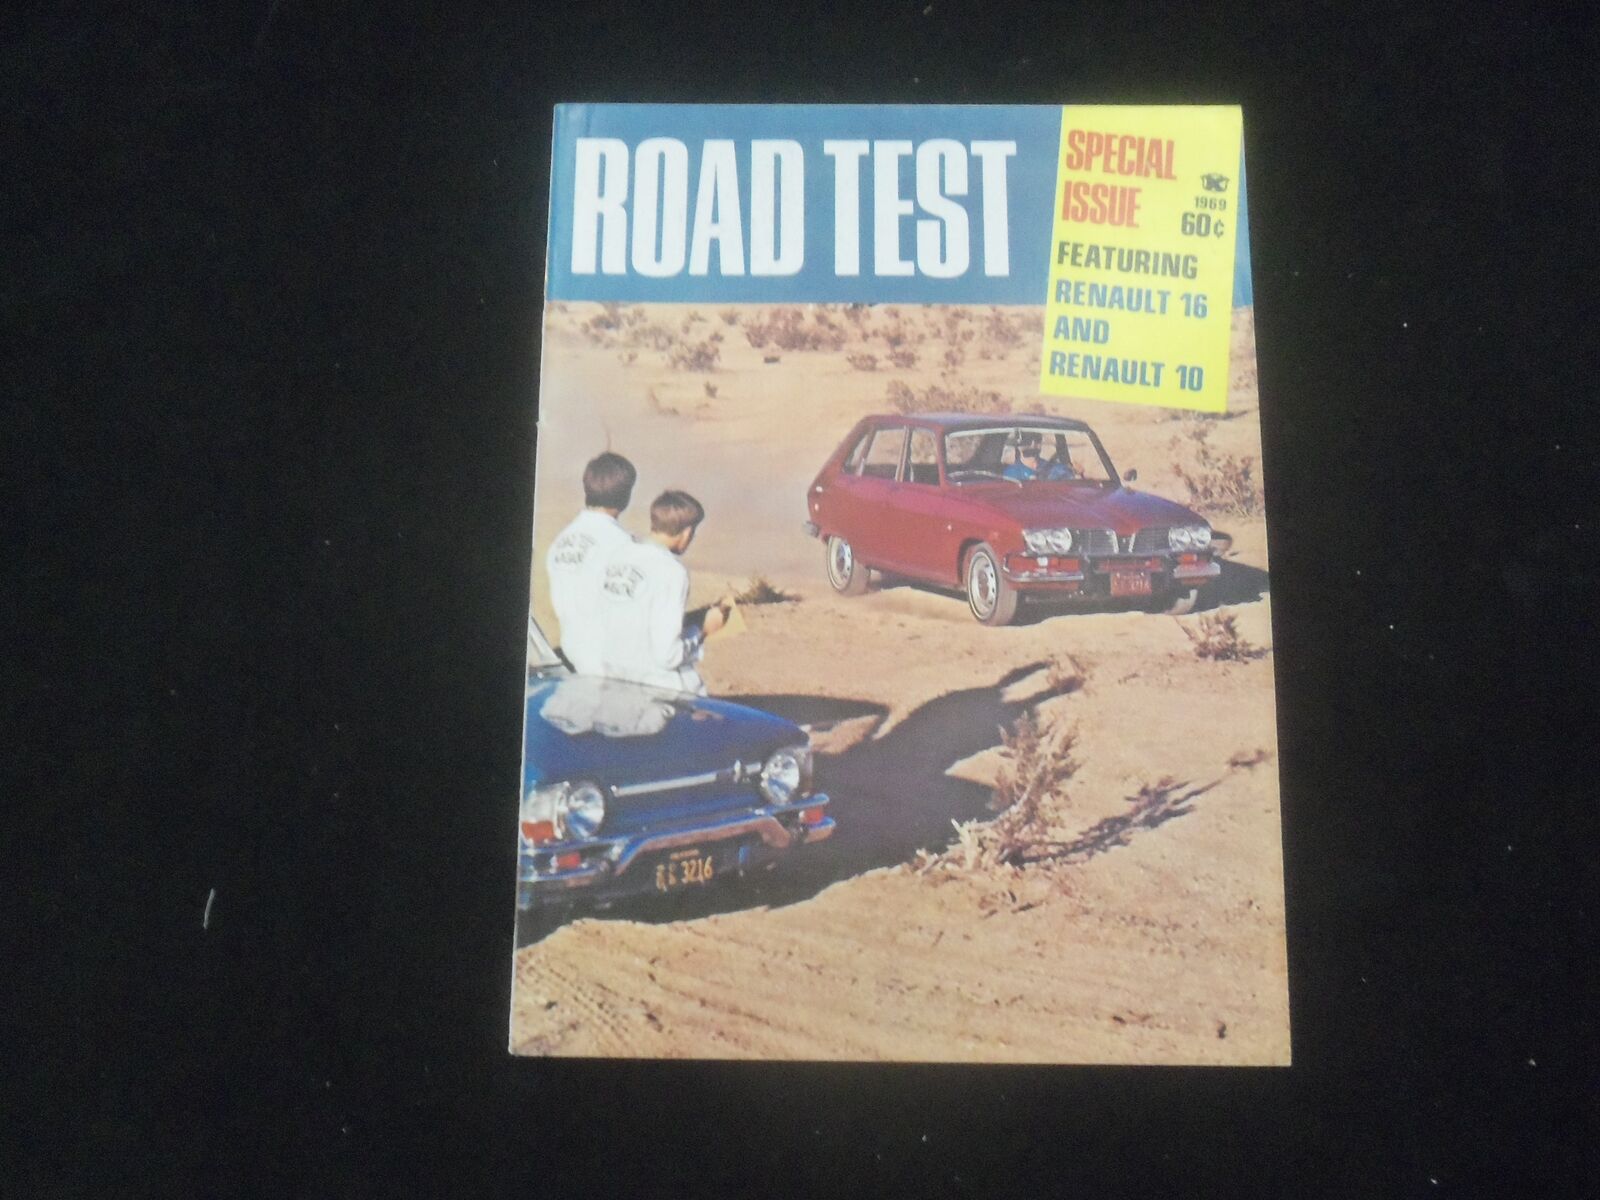 1969 ROAD TEST MAGAZINE - SPECIAL ISSUE - RENAULT 16 & RENAULT 10 - J 7824